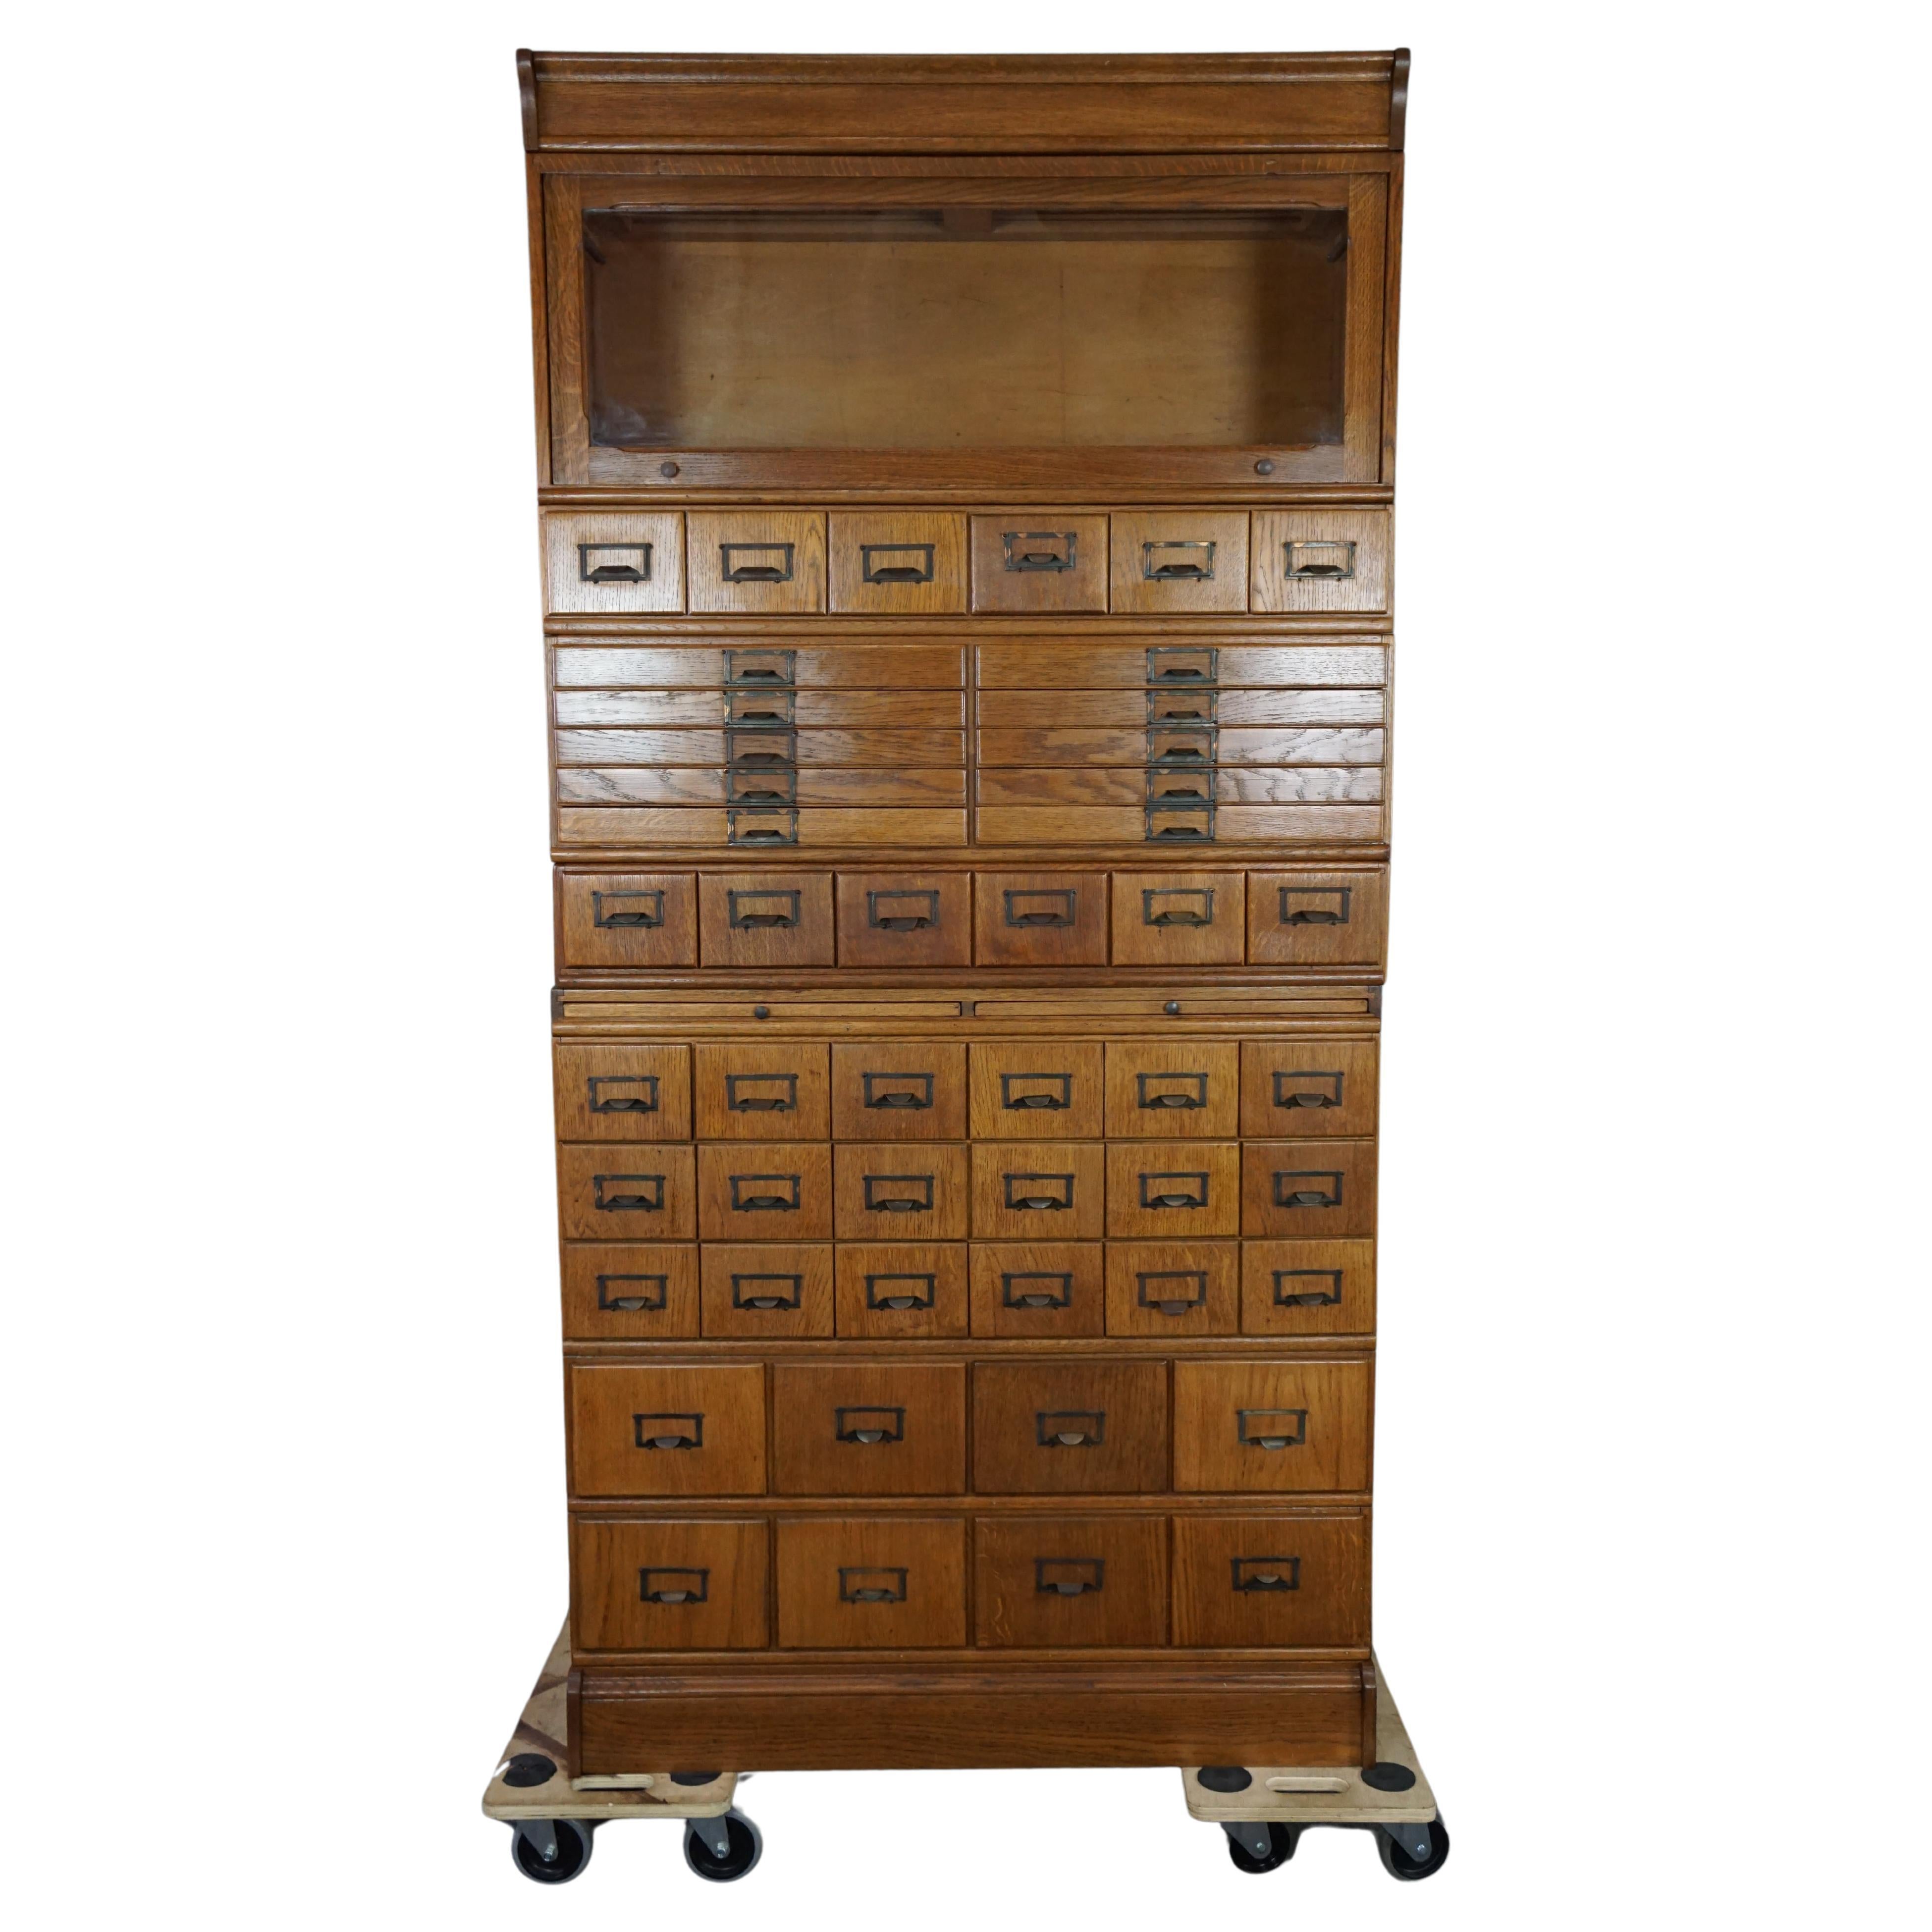 Unique antique oak pharmacy cabinet full of storage options, early 1900s